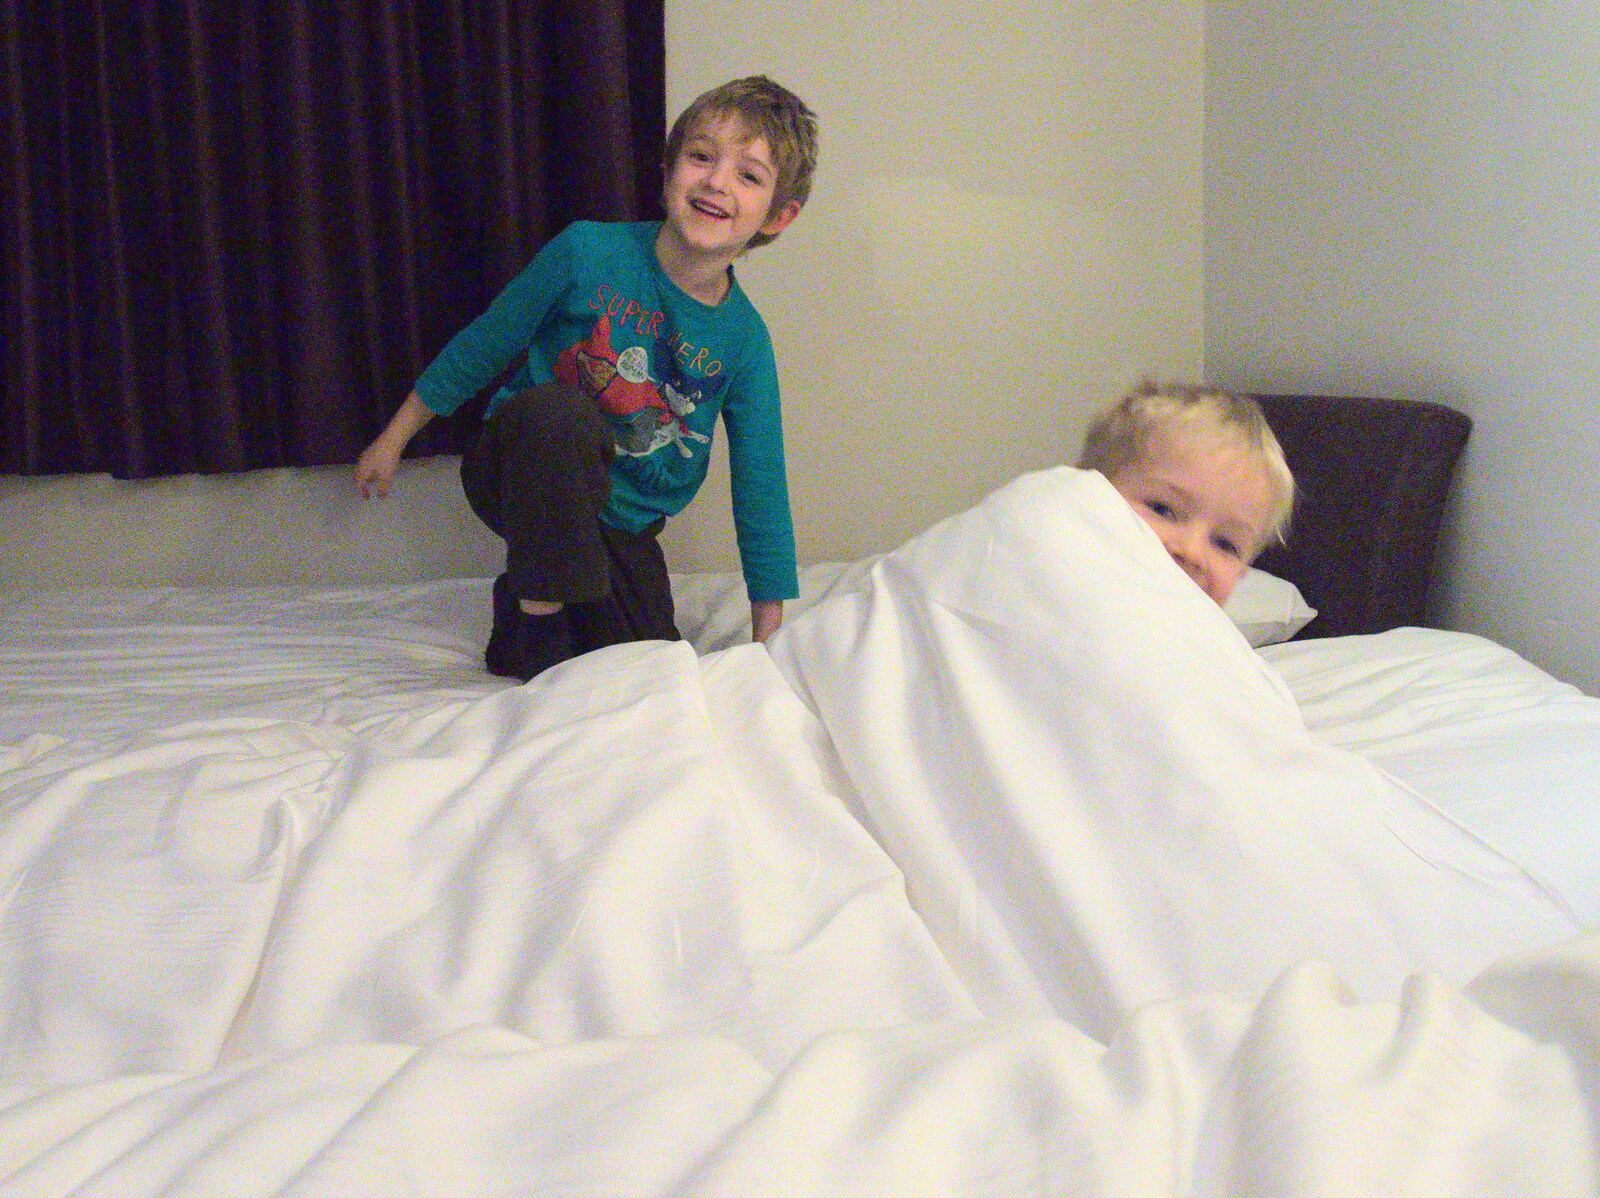 The boys just love to mess around in hotel beds from A Party and a Road Trip to Chester, Suffolk and Cheshire - 20th December 2015